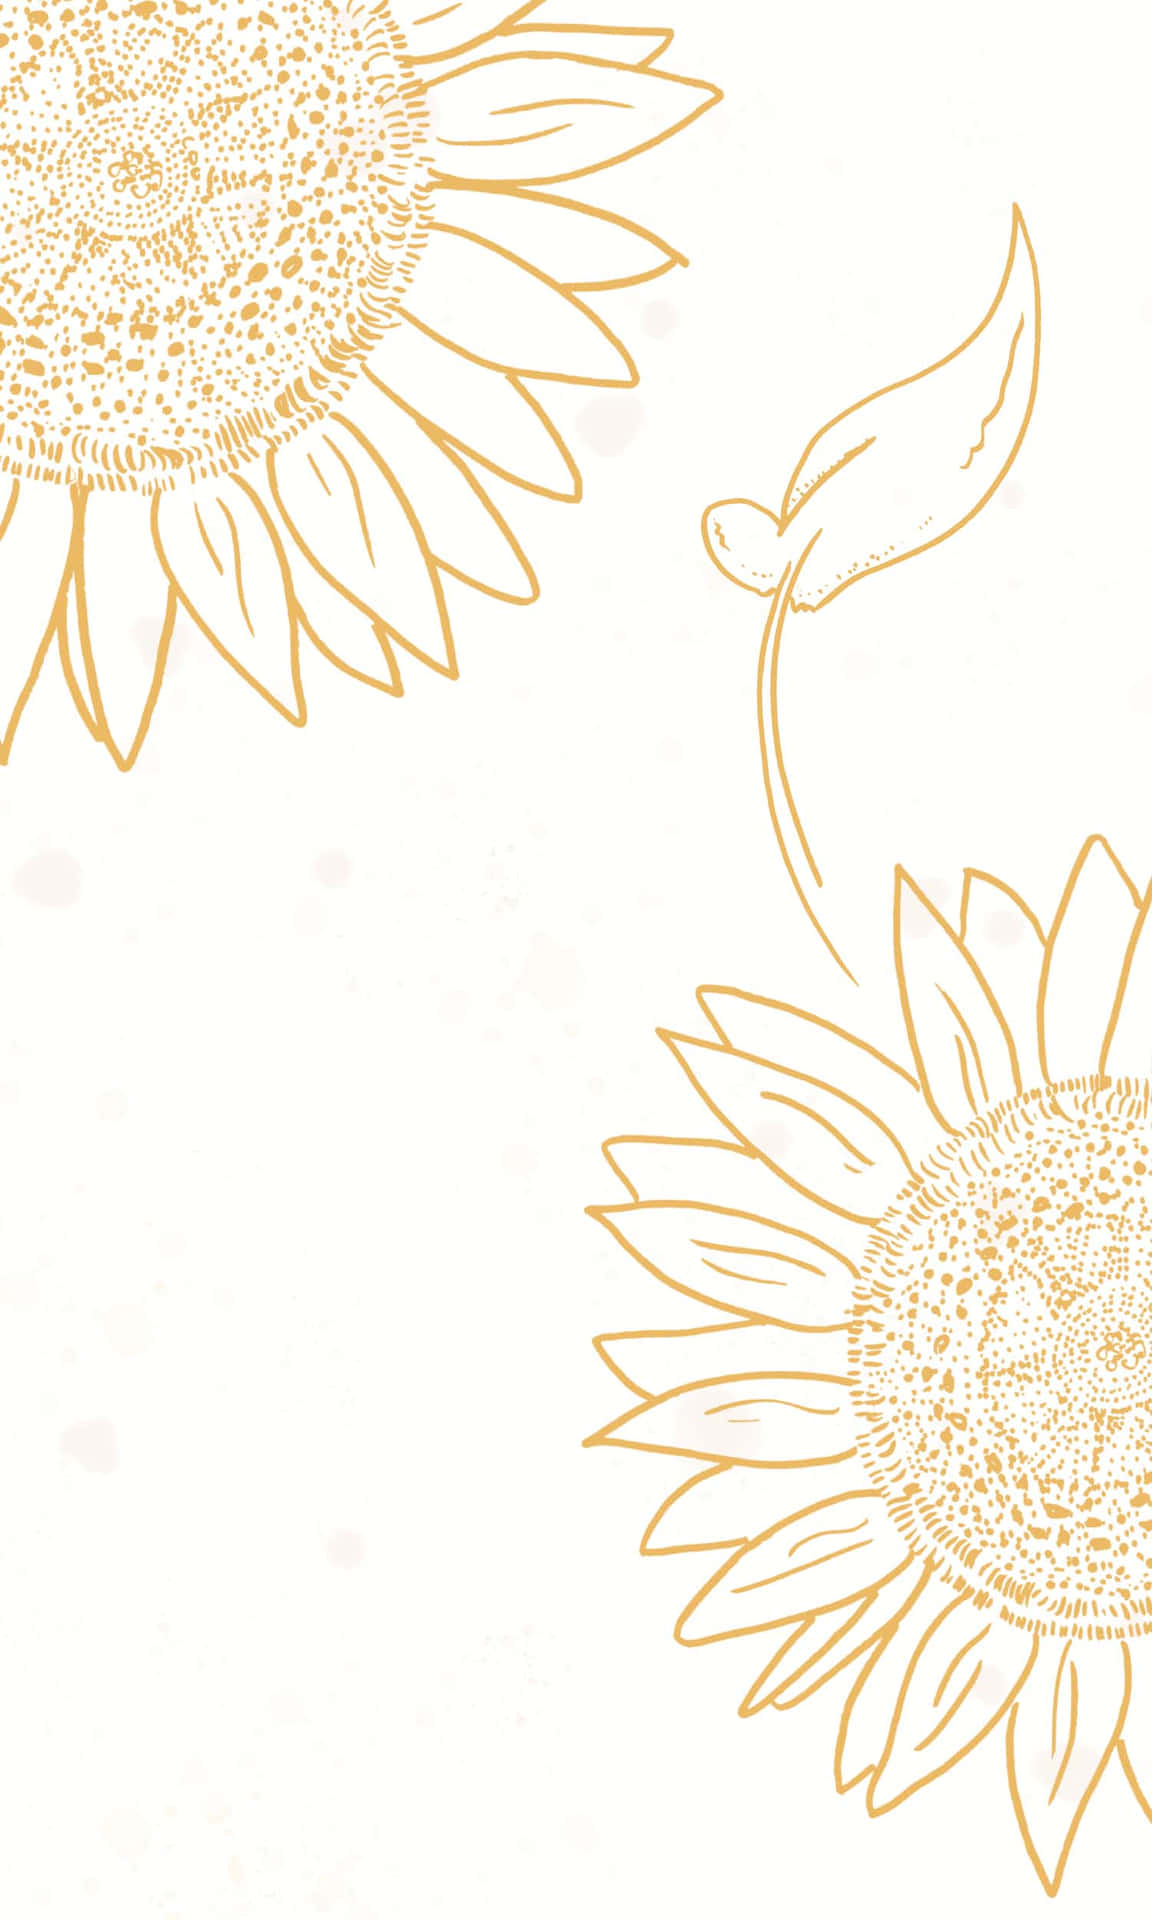 A beautiful sunflower in a stunning background of white and yellow tones